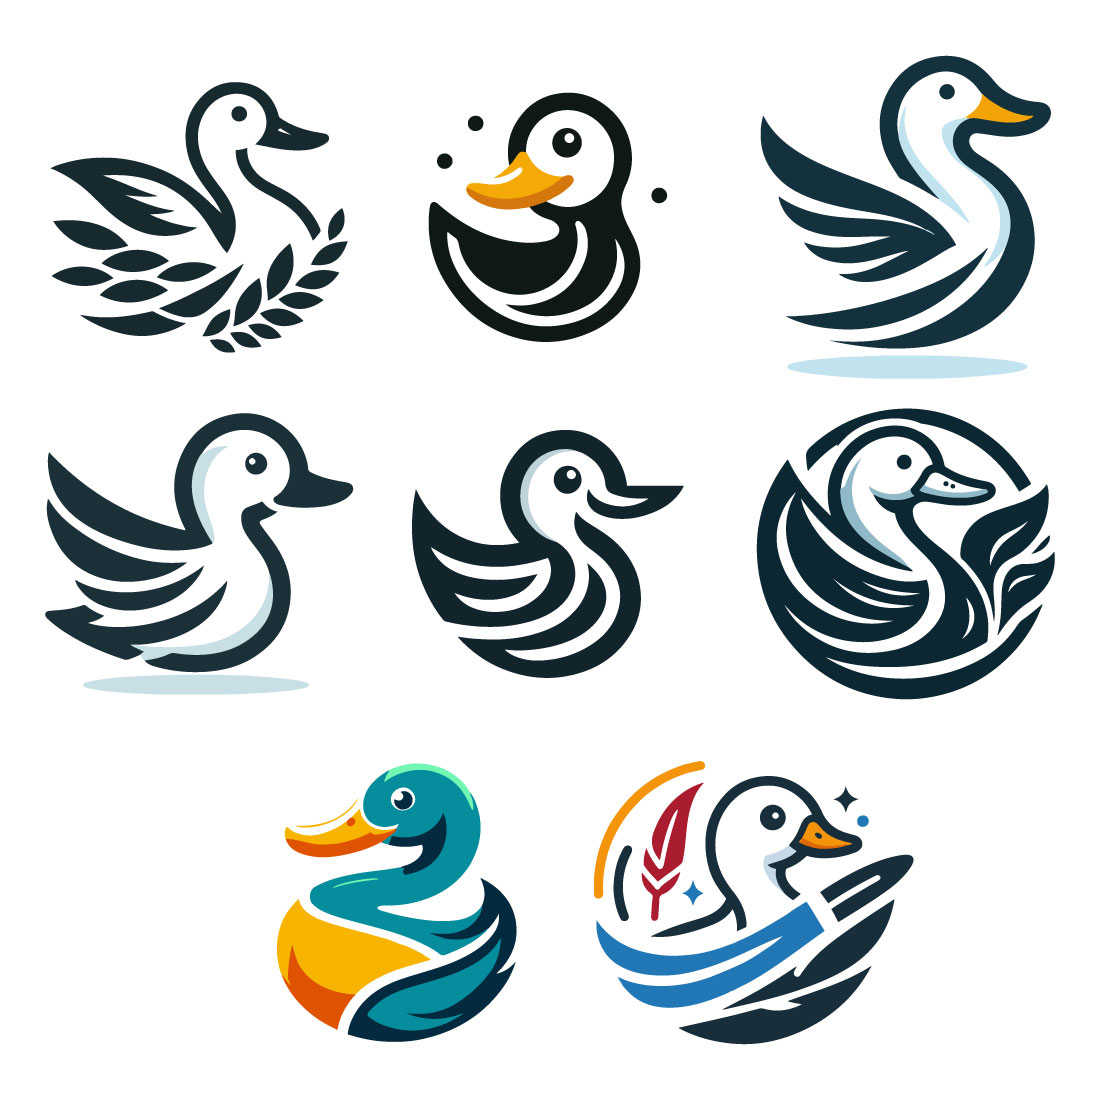 8 Duck Logos Vector Illustration preview image.